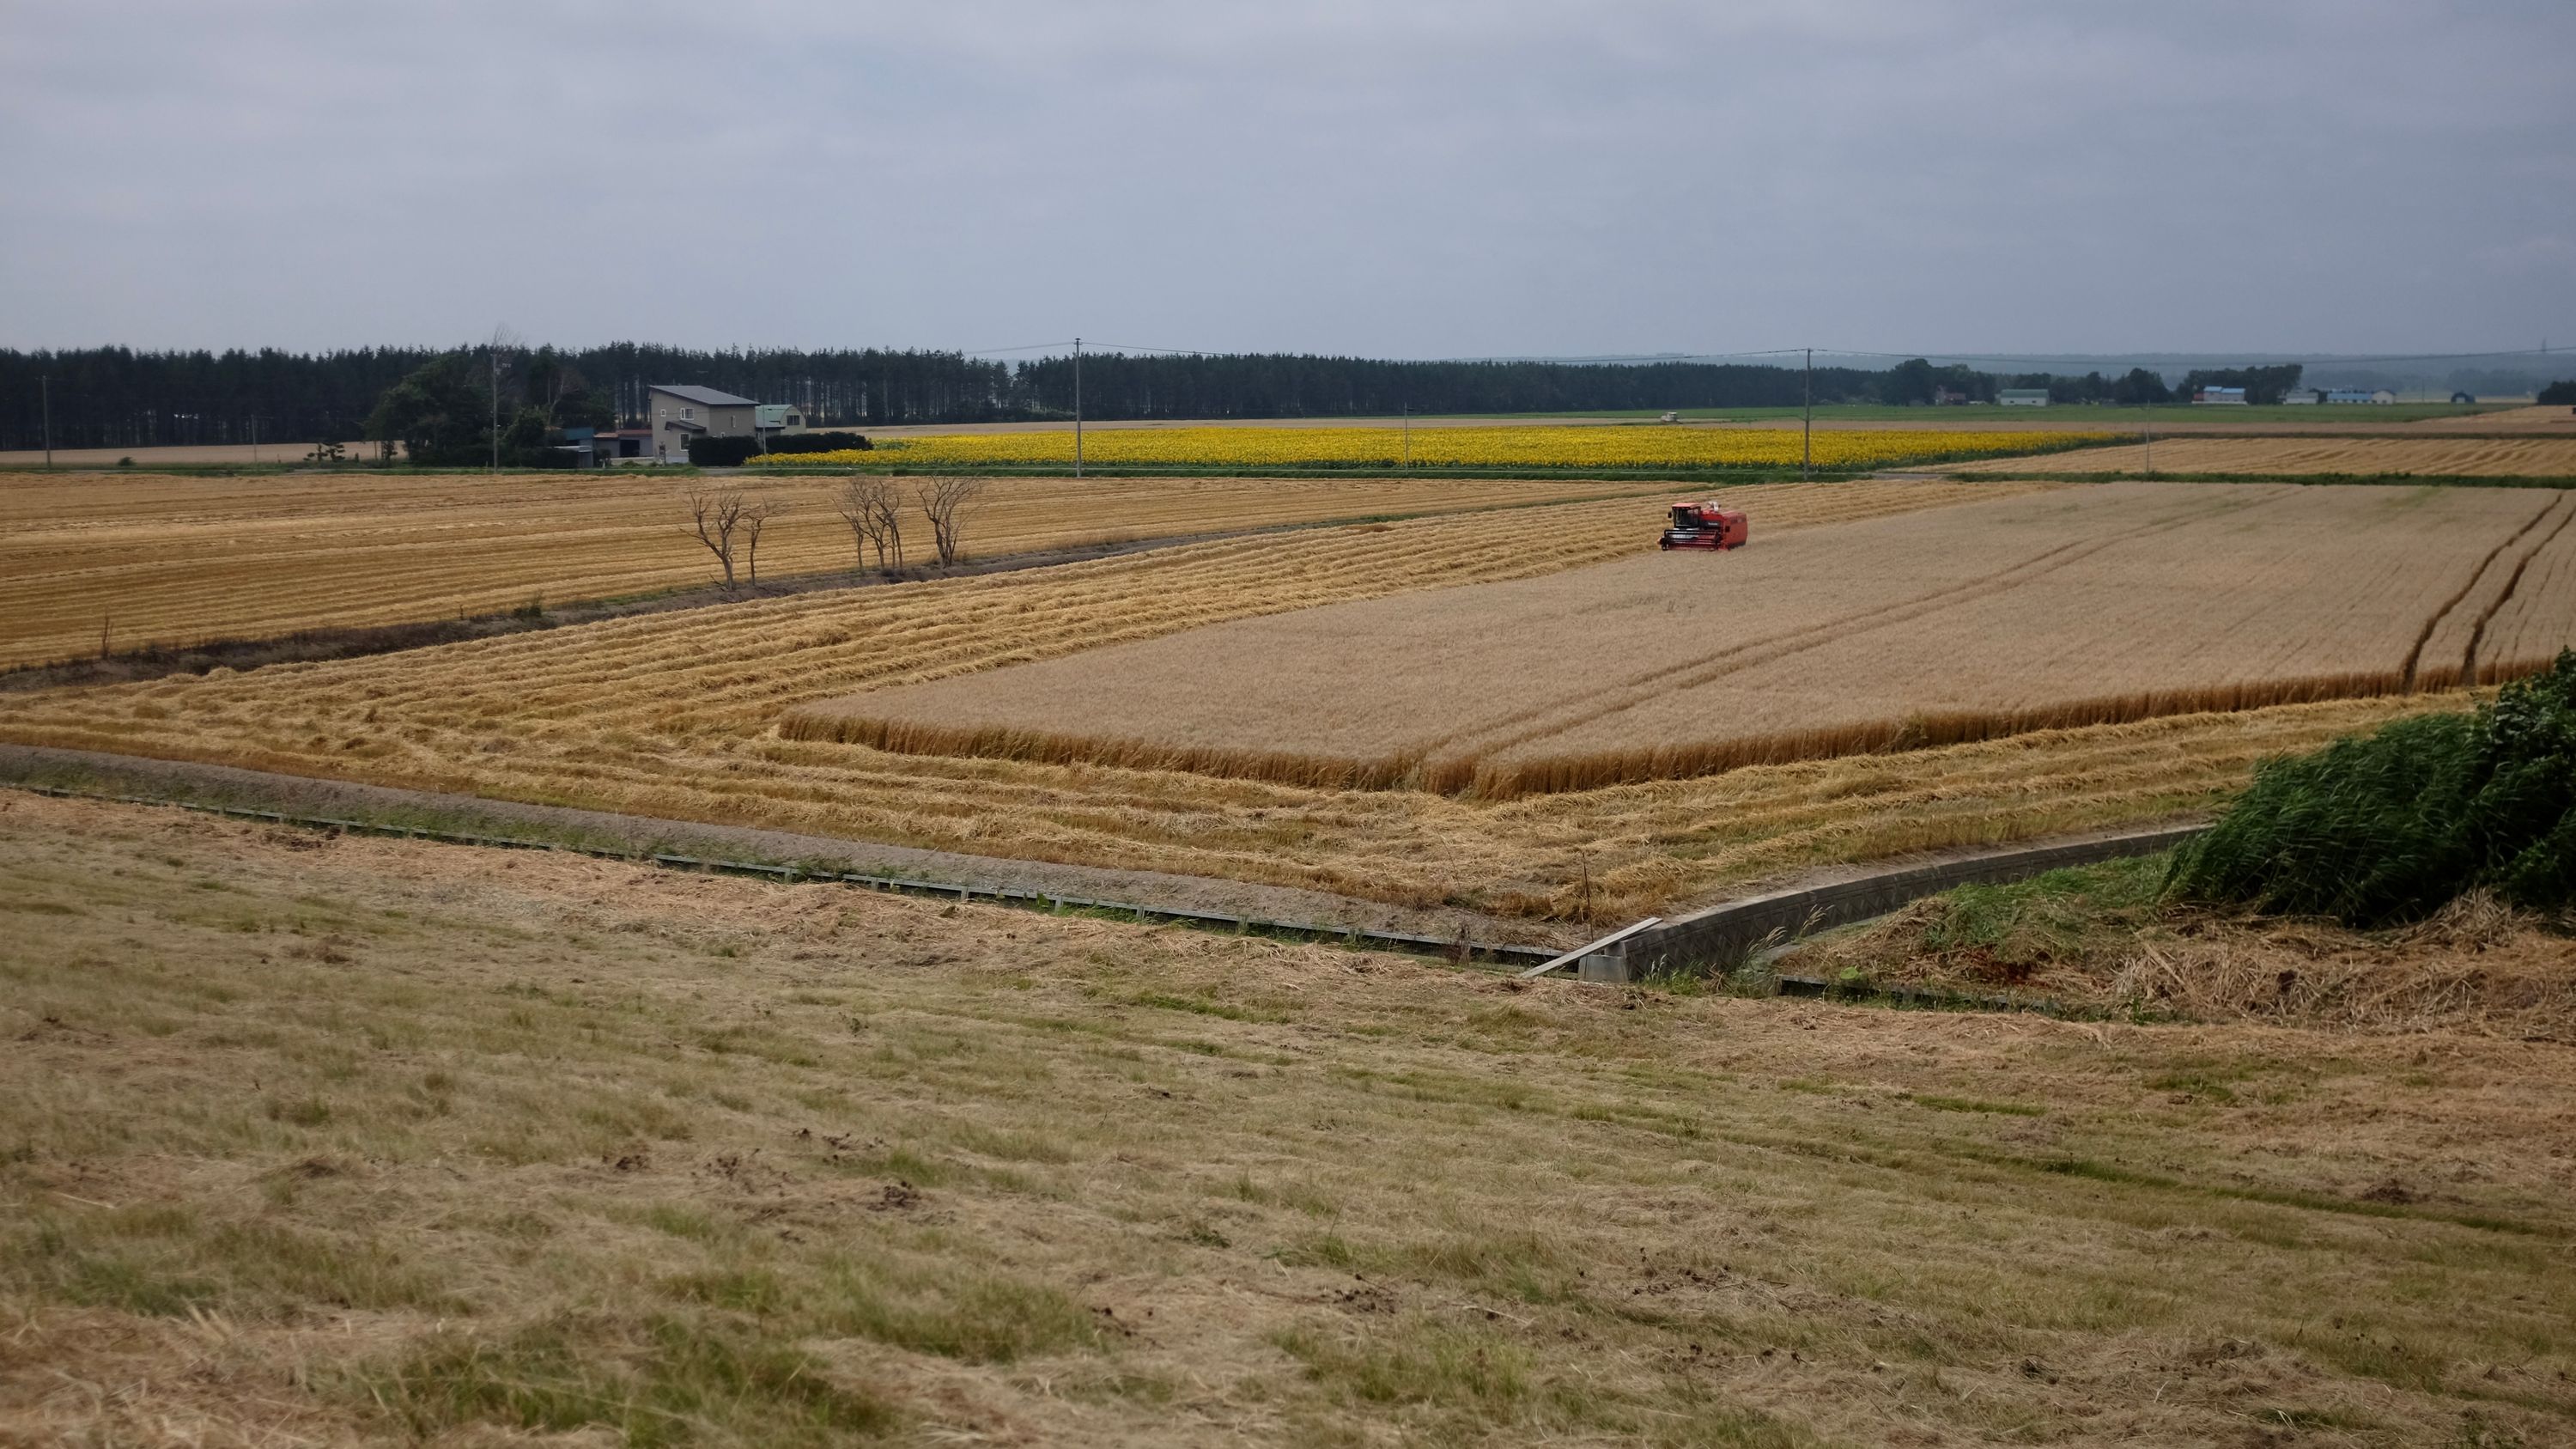 A combined harvester works on a wheat field.